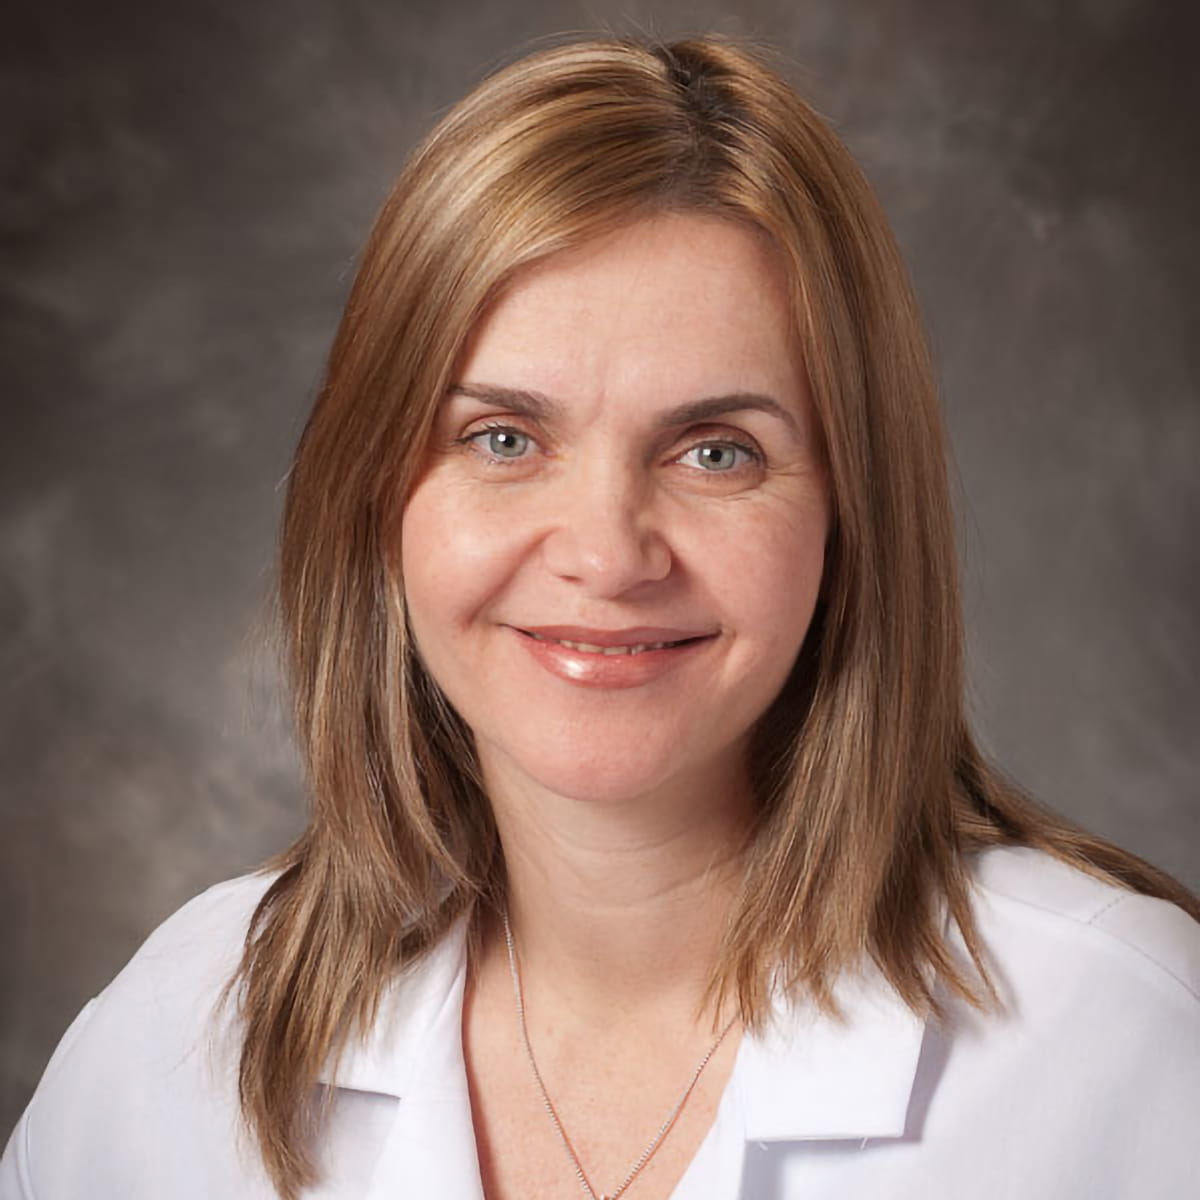 A friendly headshot of Ana Combes Osacar, MD